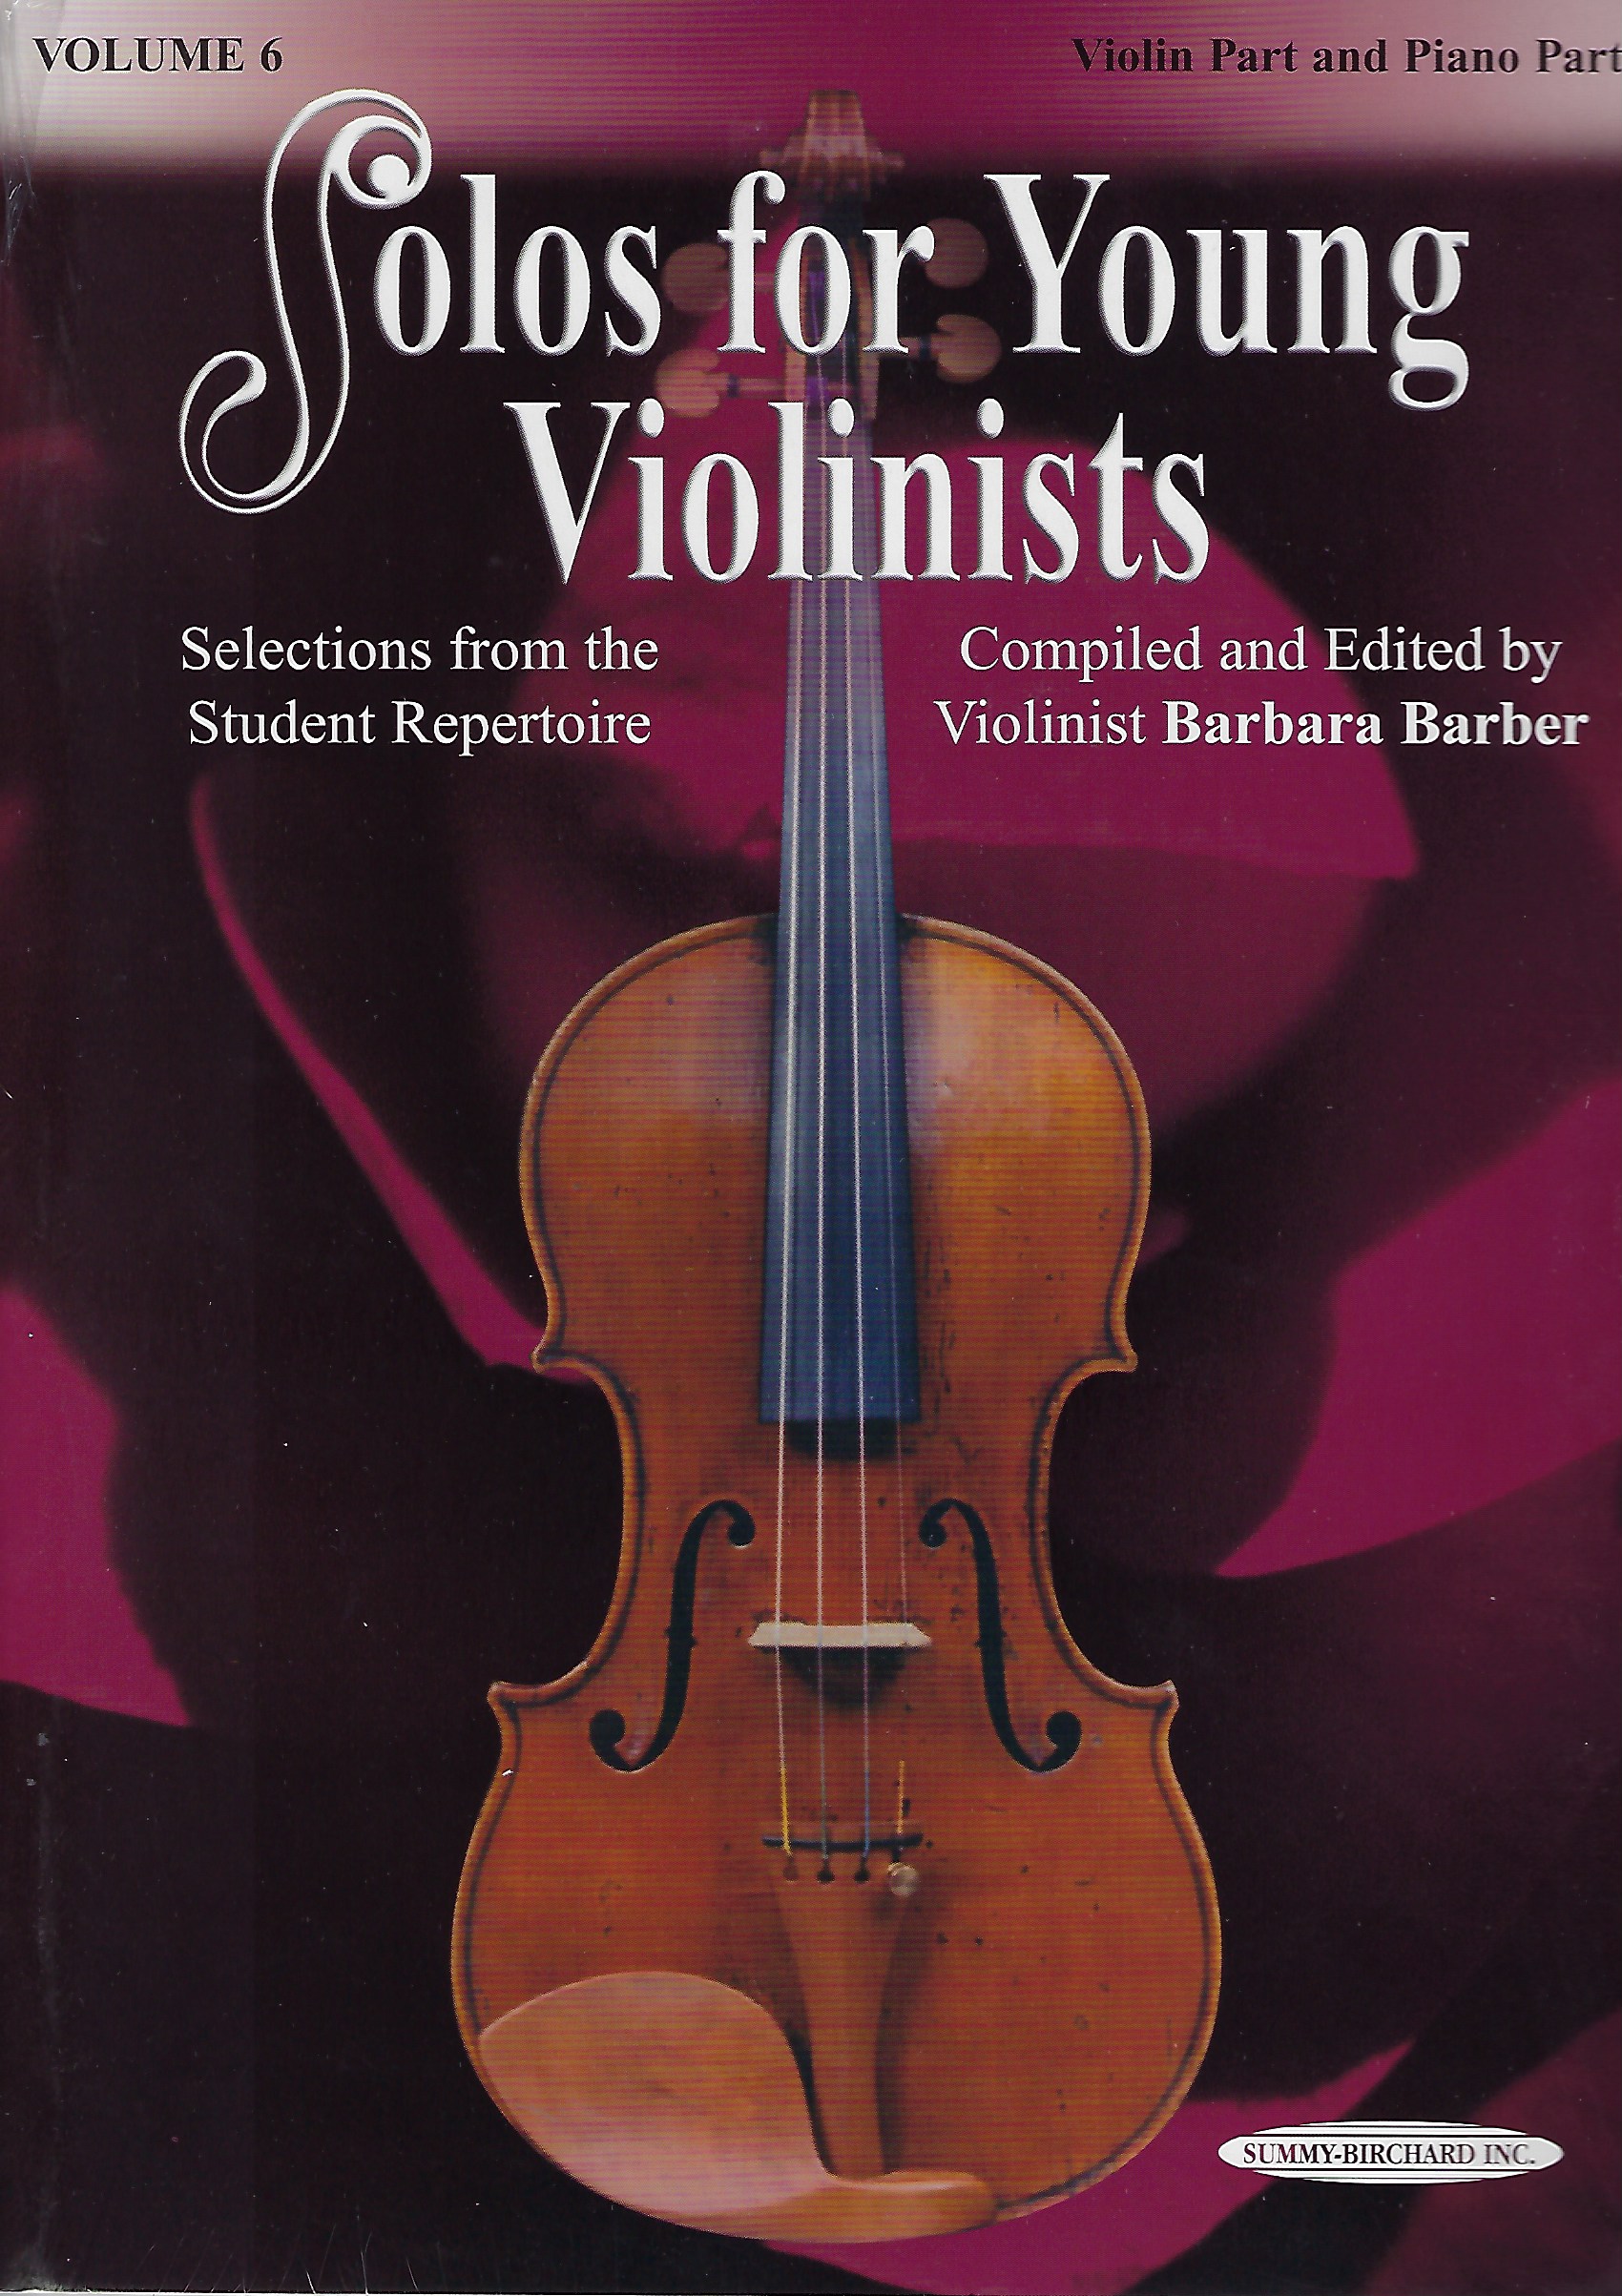 Solos for Young Violinists vol. 6